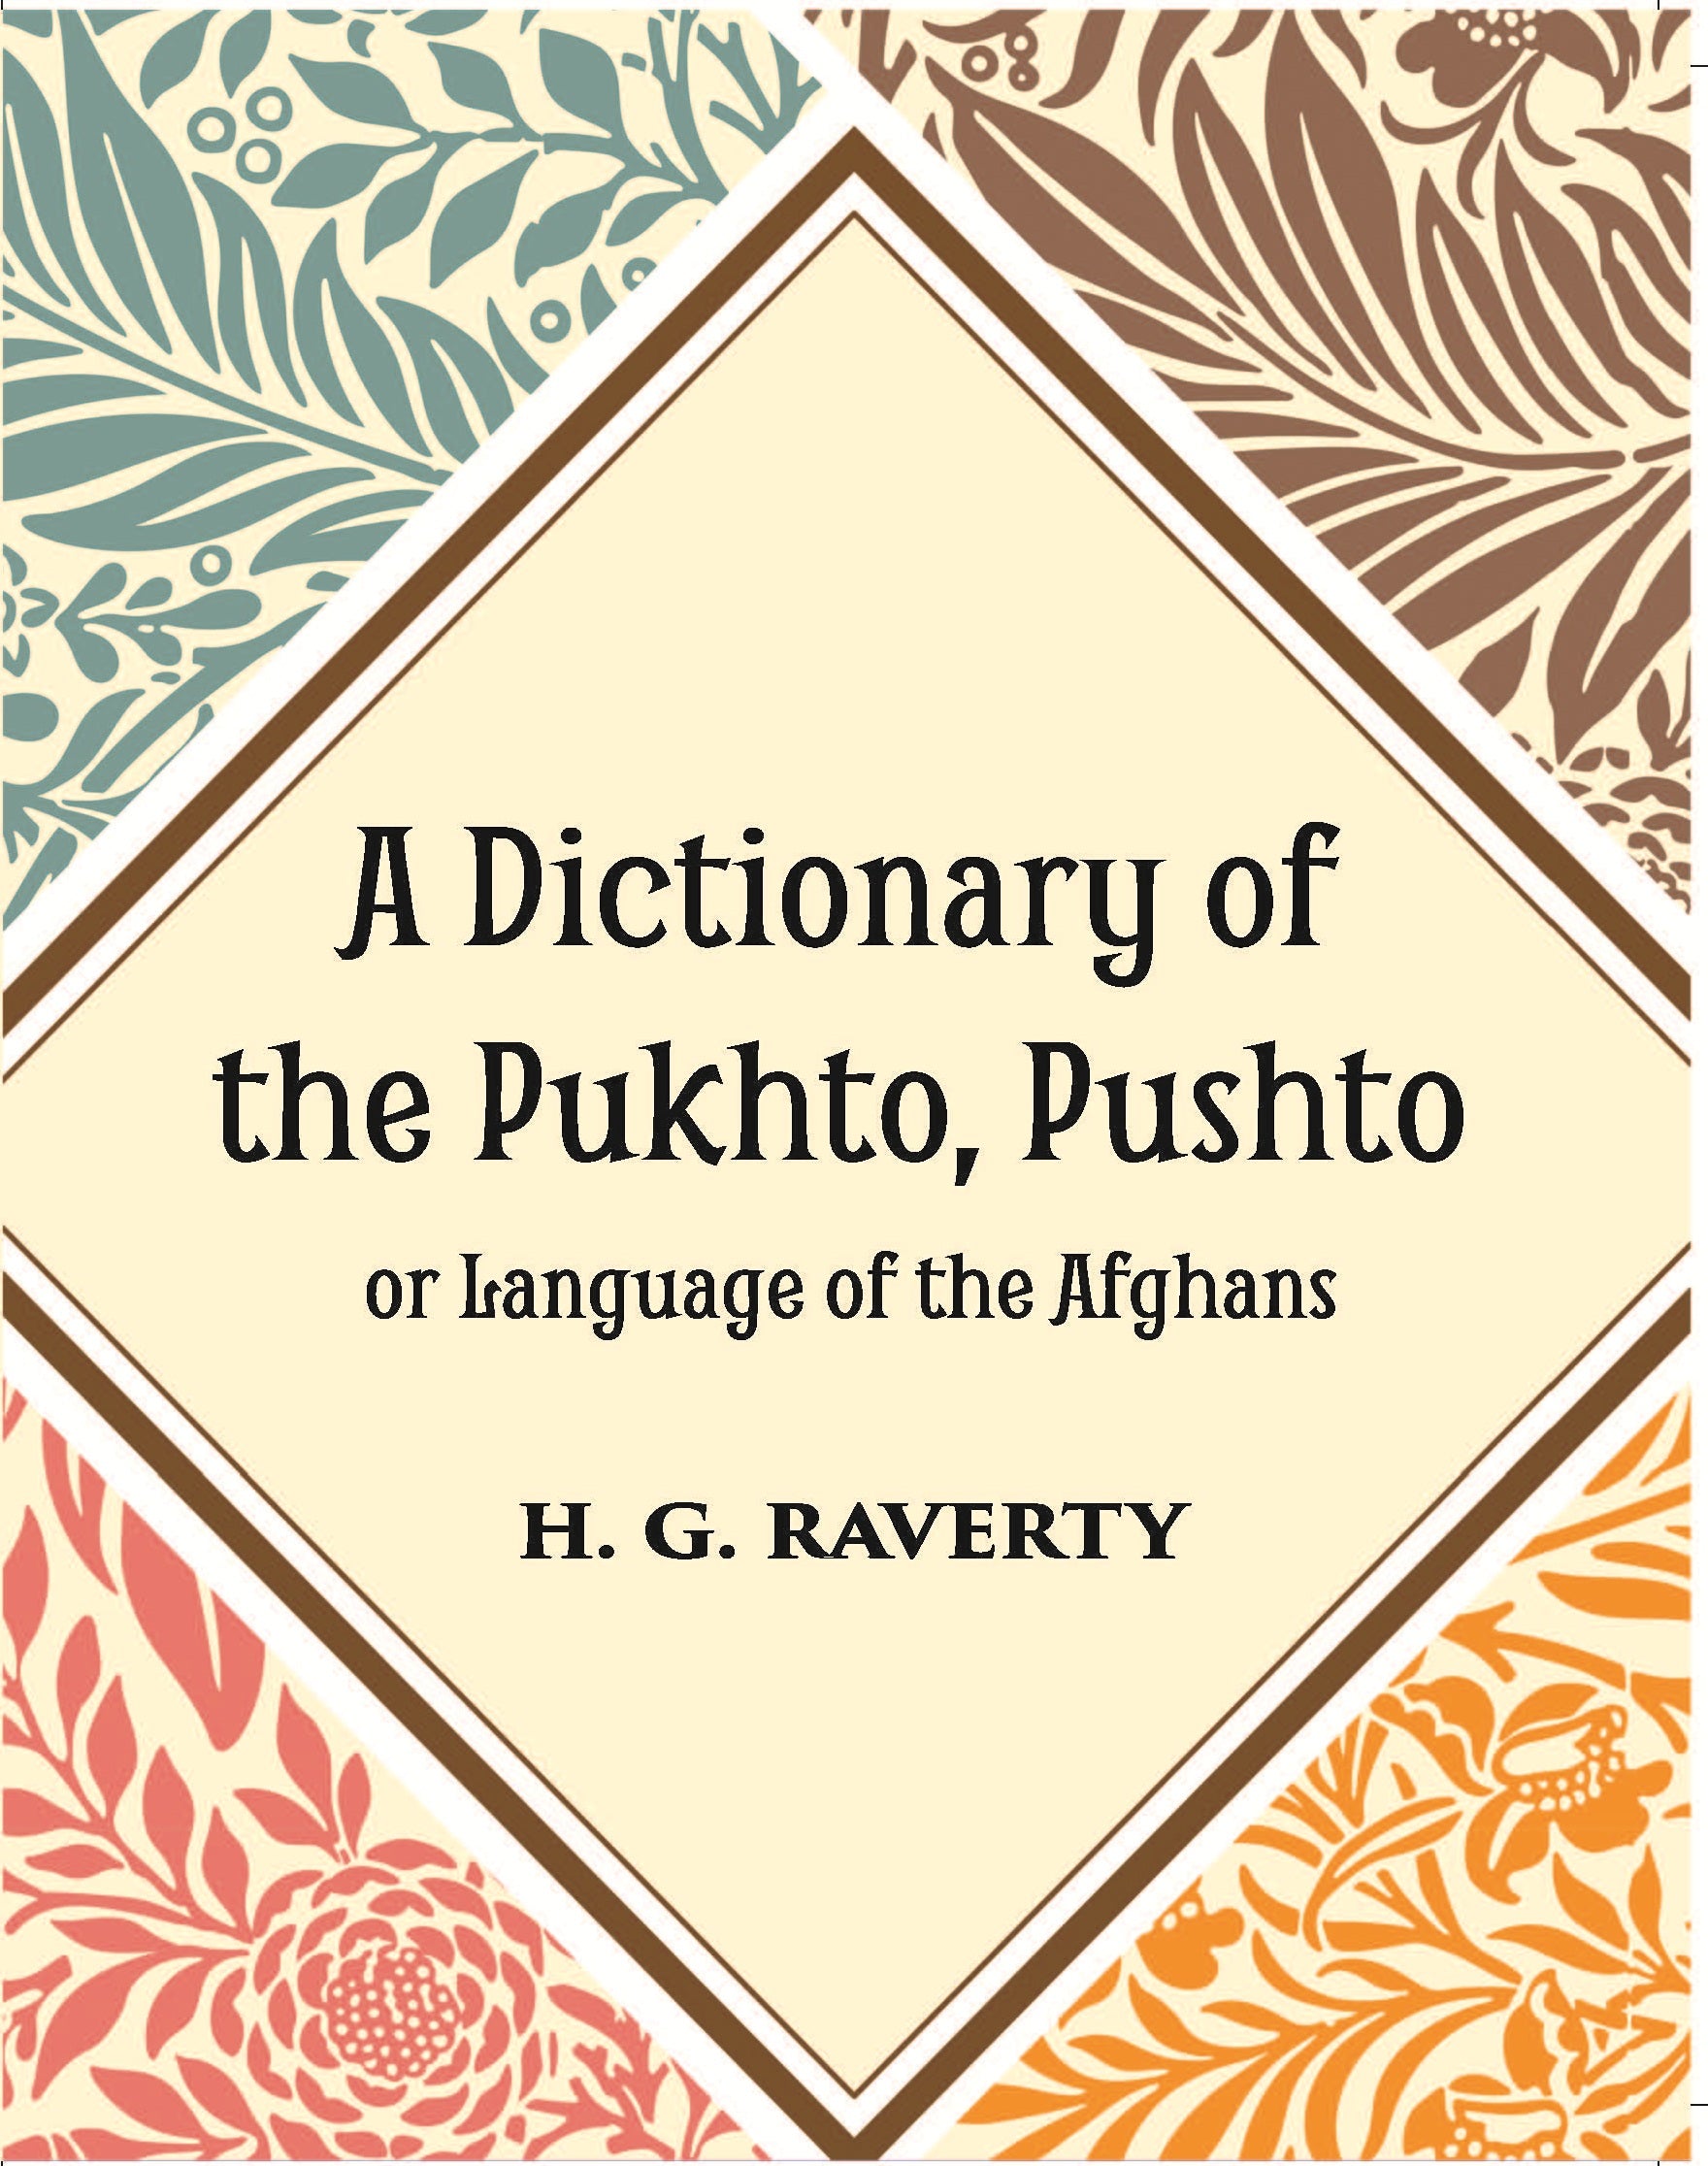 A Dictionary of the Pukhto, Pushto, or, Language of the Afghans